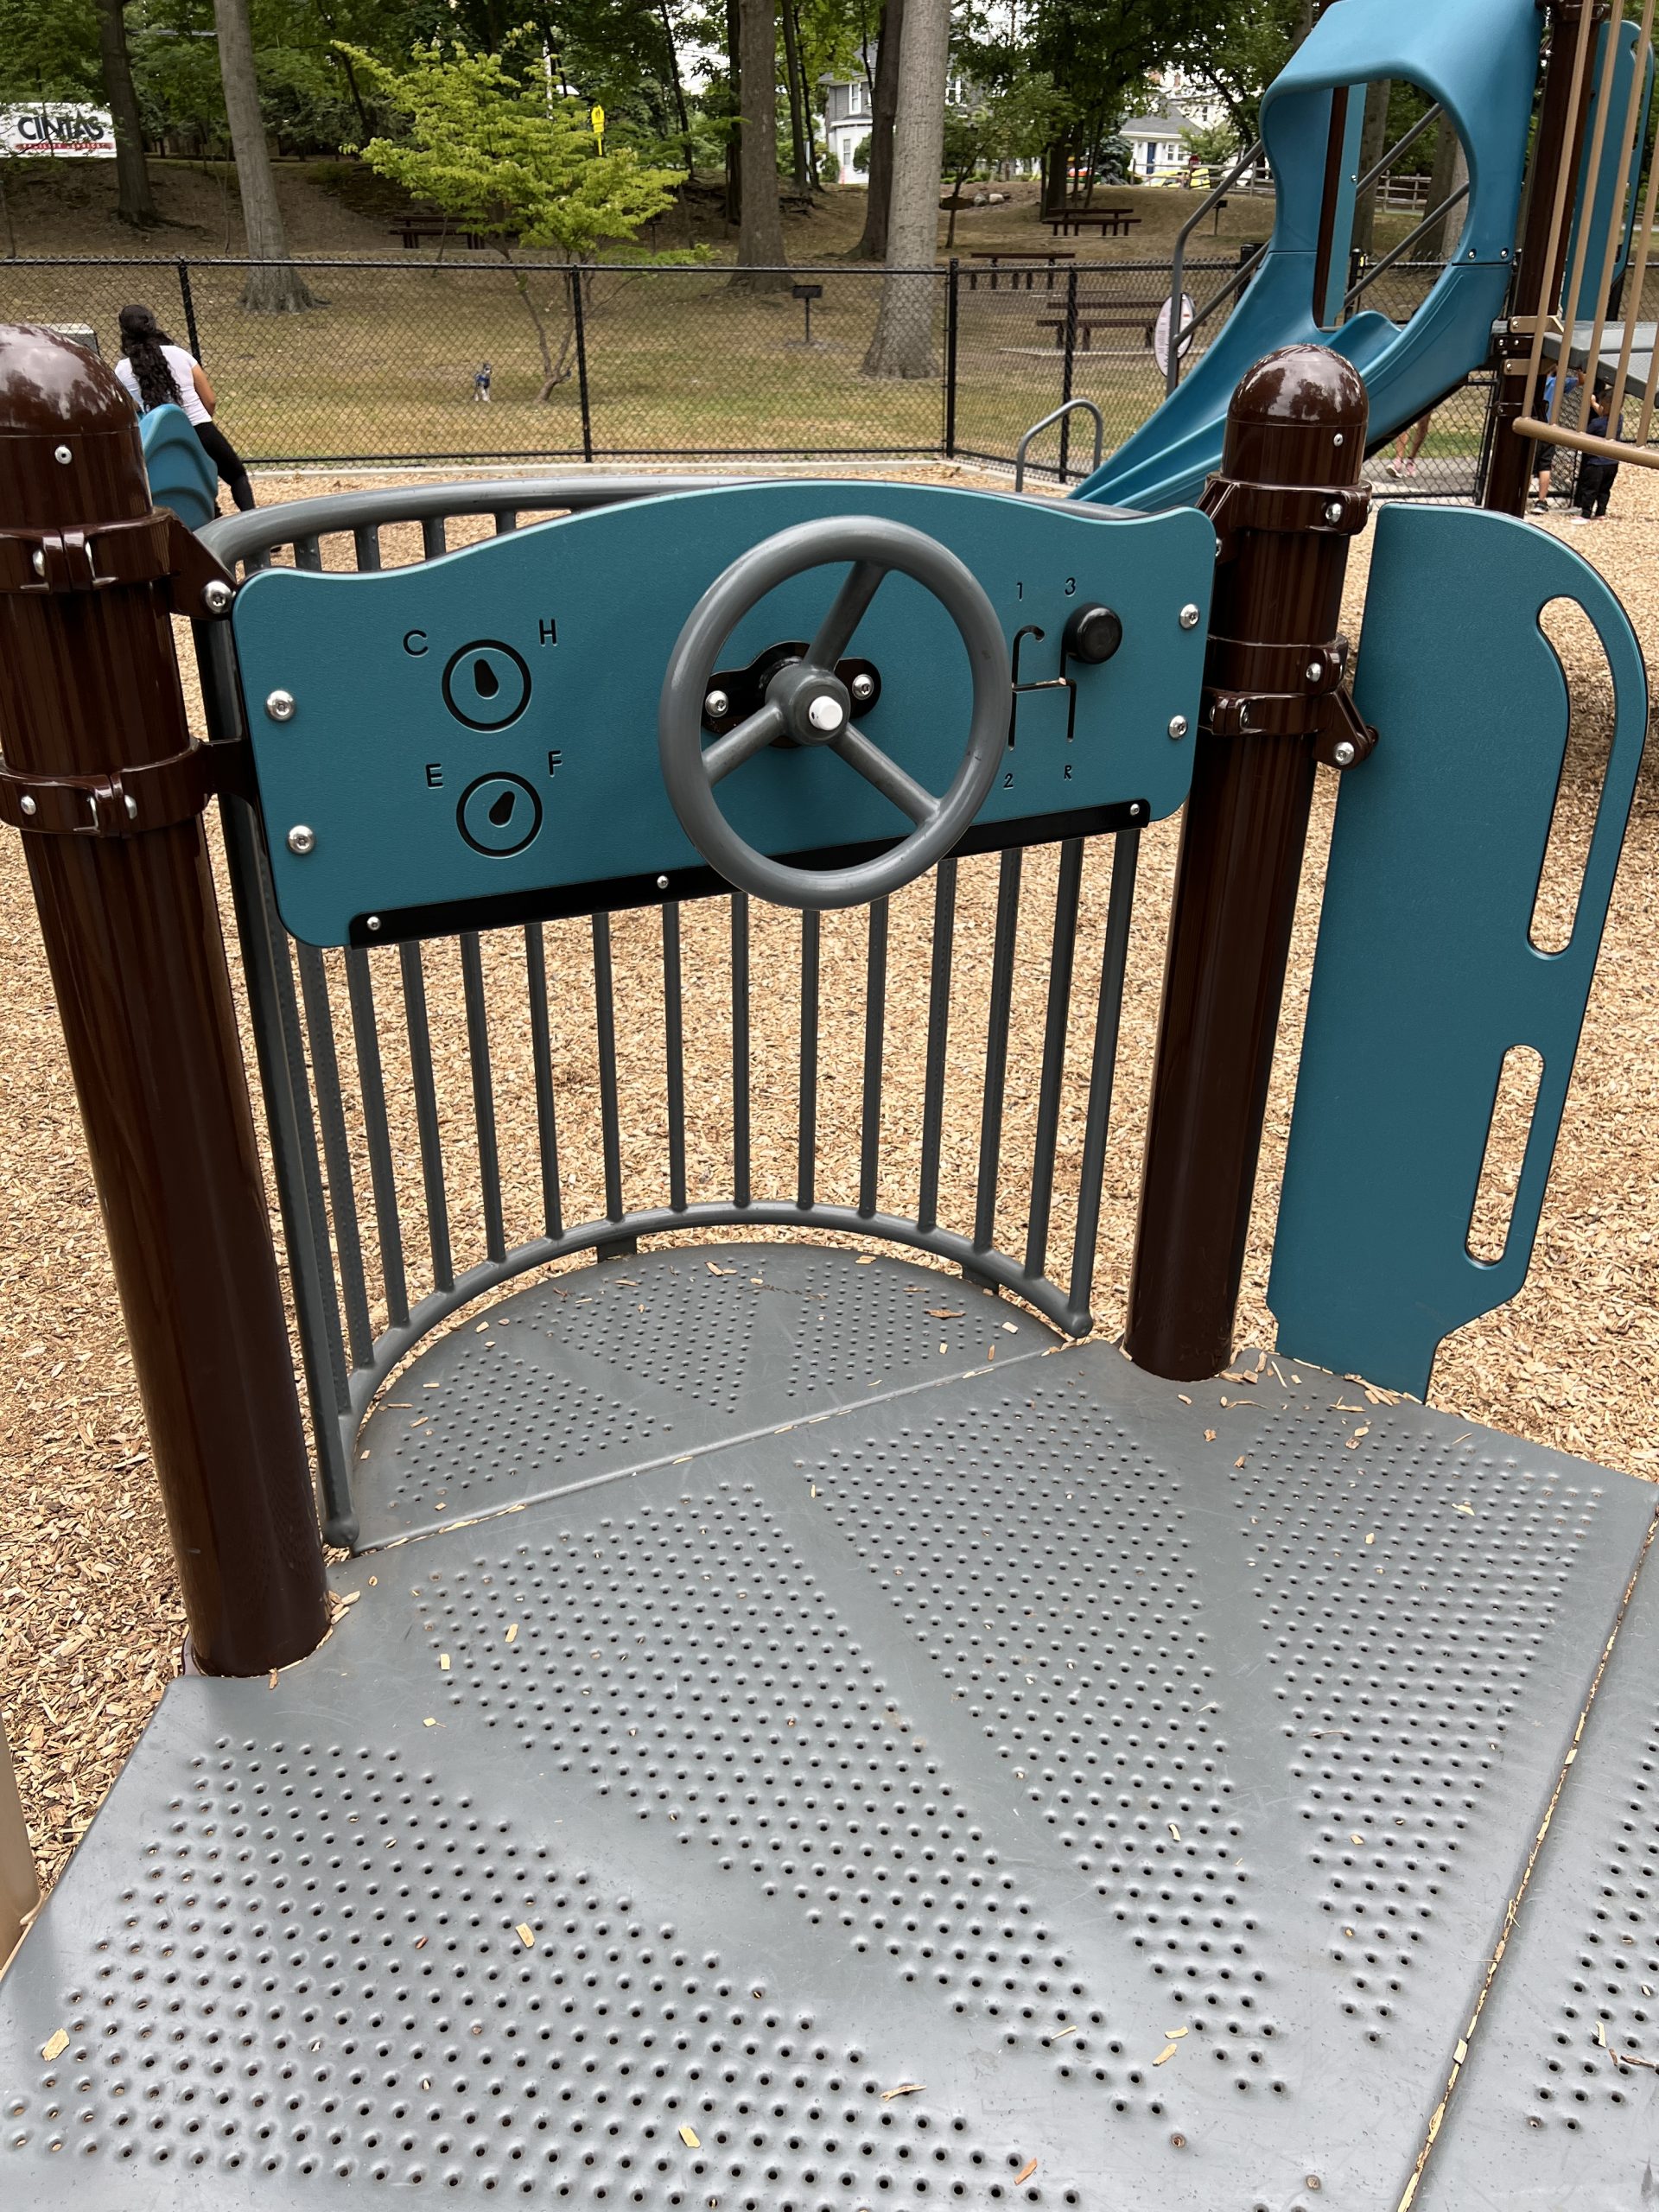 Goffle Brook Park Playground in Hawthorne NJ - Large playground feature - sensory play steering wheel